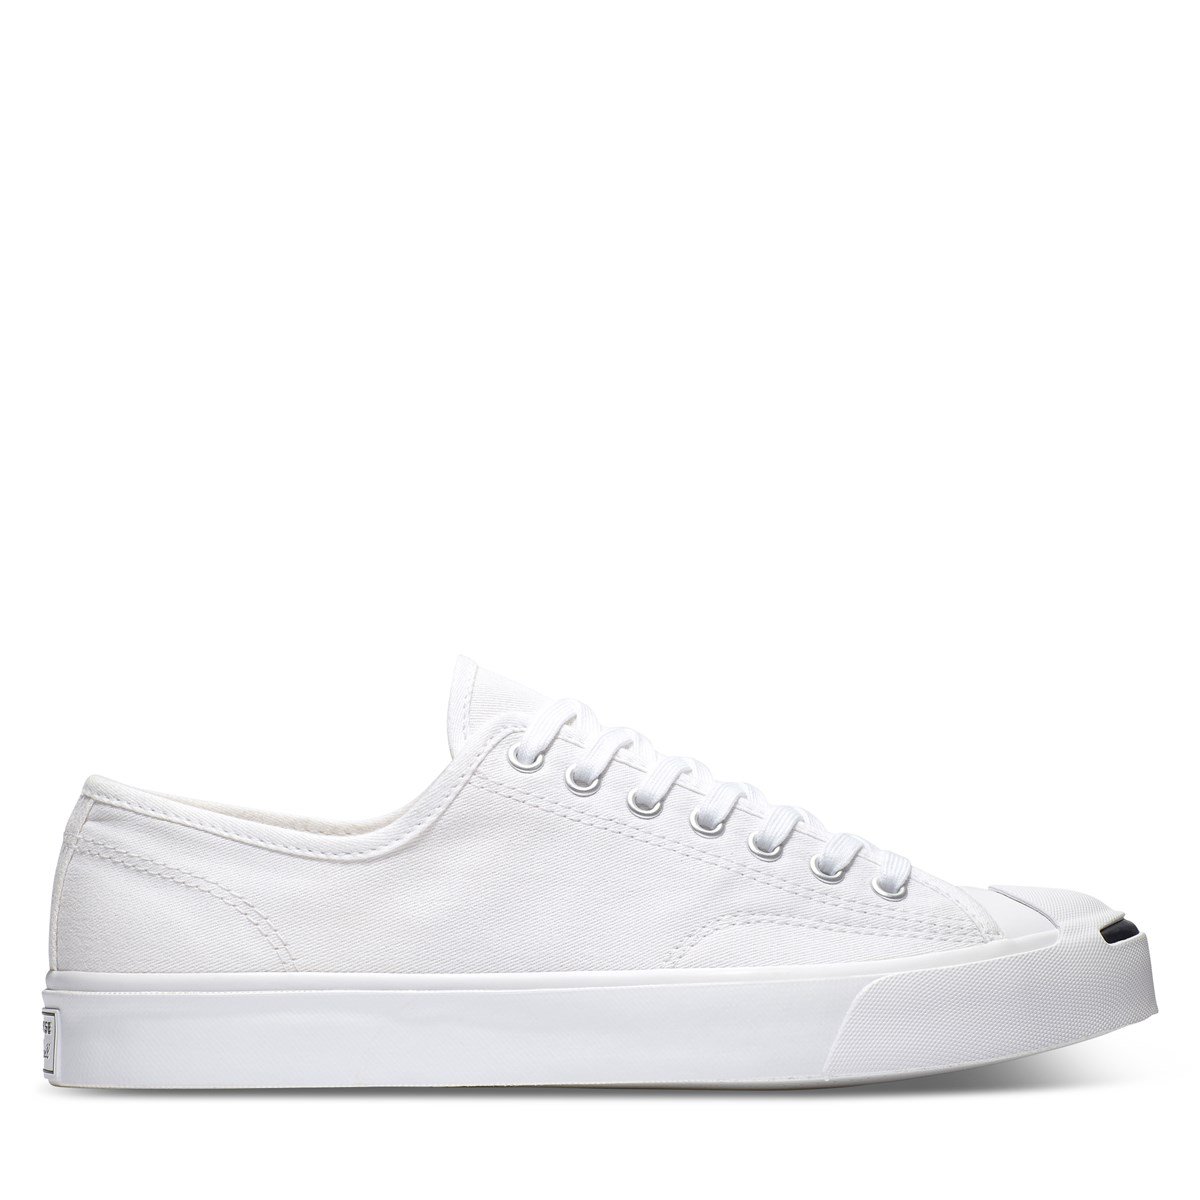 converse jack purcell canada